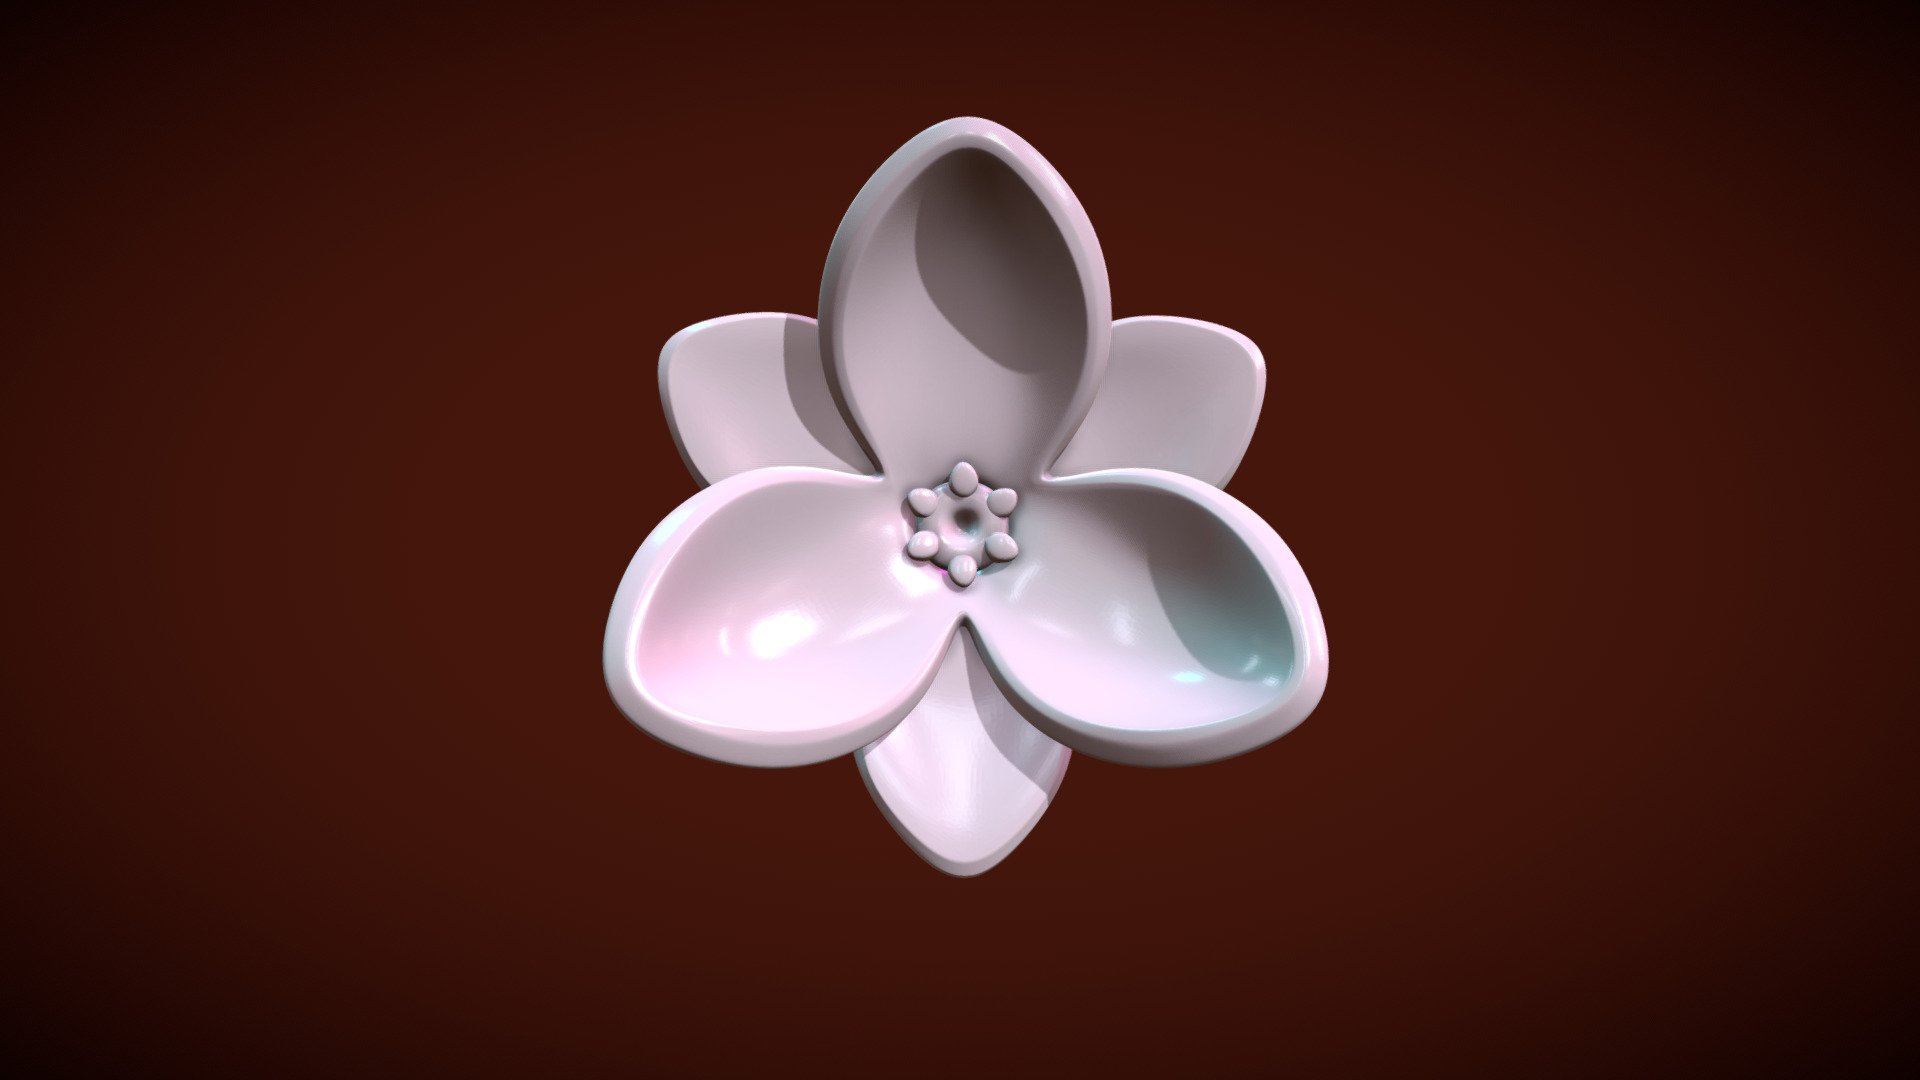 Print ready flower.

Measure units are millimeters, the figure is about 18.5 mm in width.
Petal thickness is about 1.1 mm.

Mesh is manifold, no holes, no inverted faces, no bad contiguous edges.

Available formats: .blend, .stl, .obj, .fbx, .dae

Here is three versions of the model:

1) Flower_sld. (blend, .obj, .fbx, .dae. stl) This files contain solid version of the model. The model consists of 172872 triangular faces.

2) Flower_prts. (blend, .obj, .fbx, .dae. stl) Here is parts before boolean operations. The model consists of 216756 triangular faces 3d model